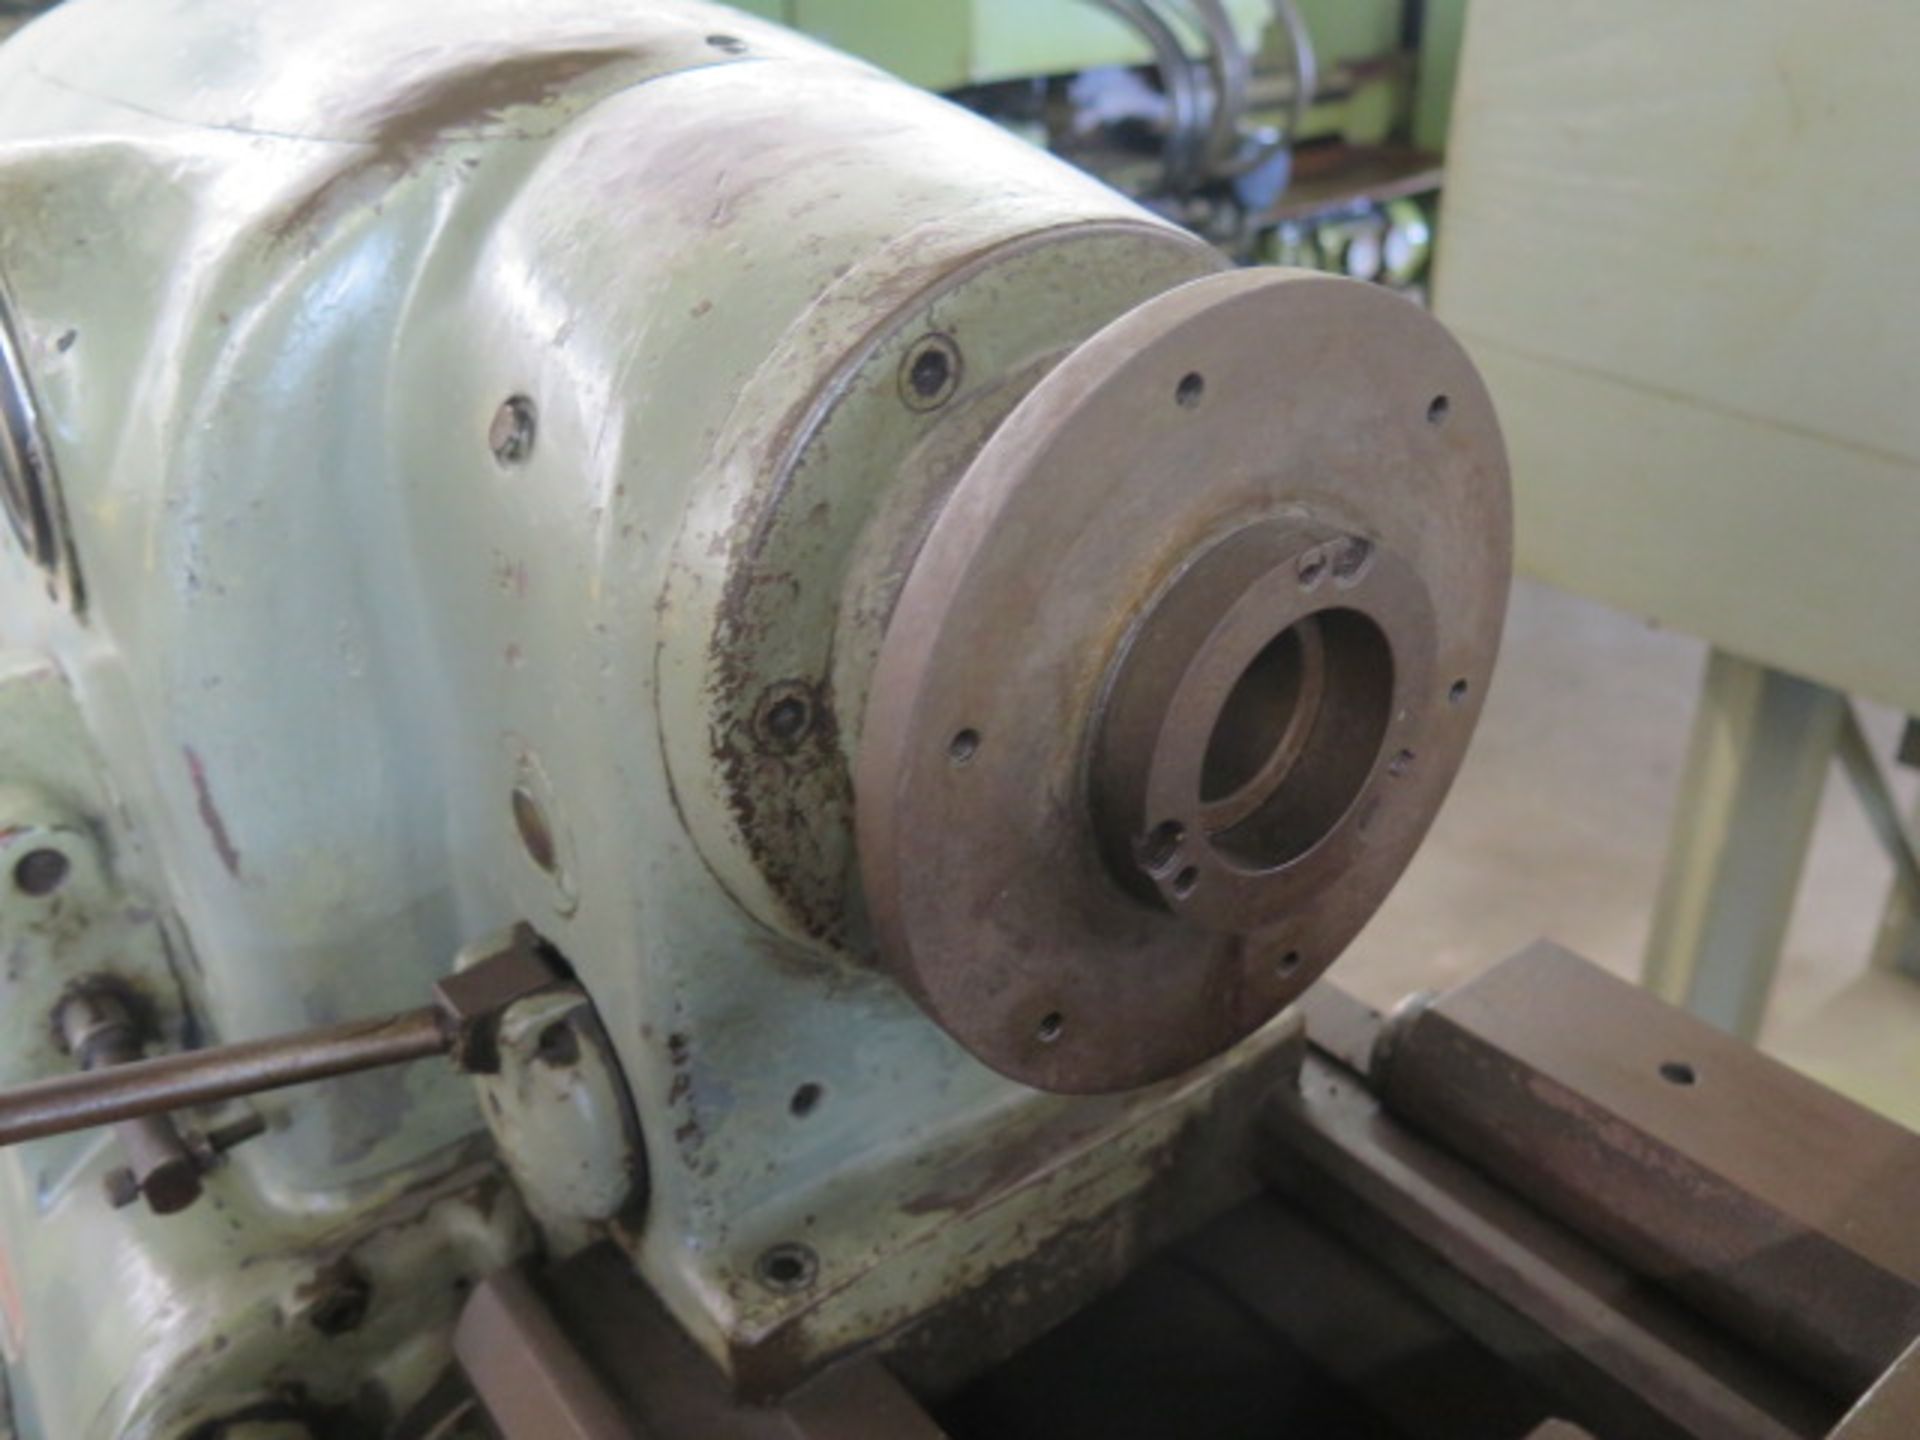 Monarch mdl. 10EE 12 ½” x 20” Tool Room Lathe s/n 28905 w/ 2500 Max RPM, Dial RPM Gage, Inch - Image 6 of 9